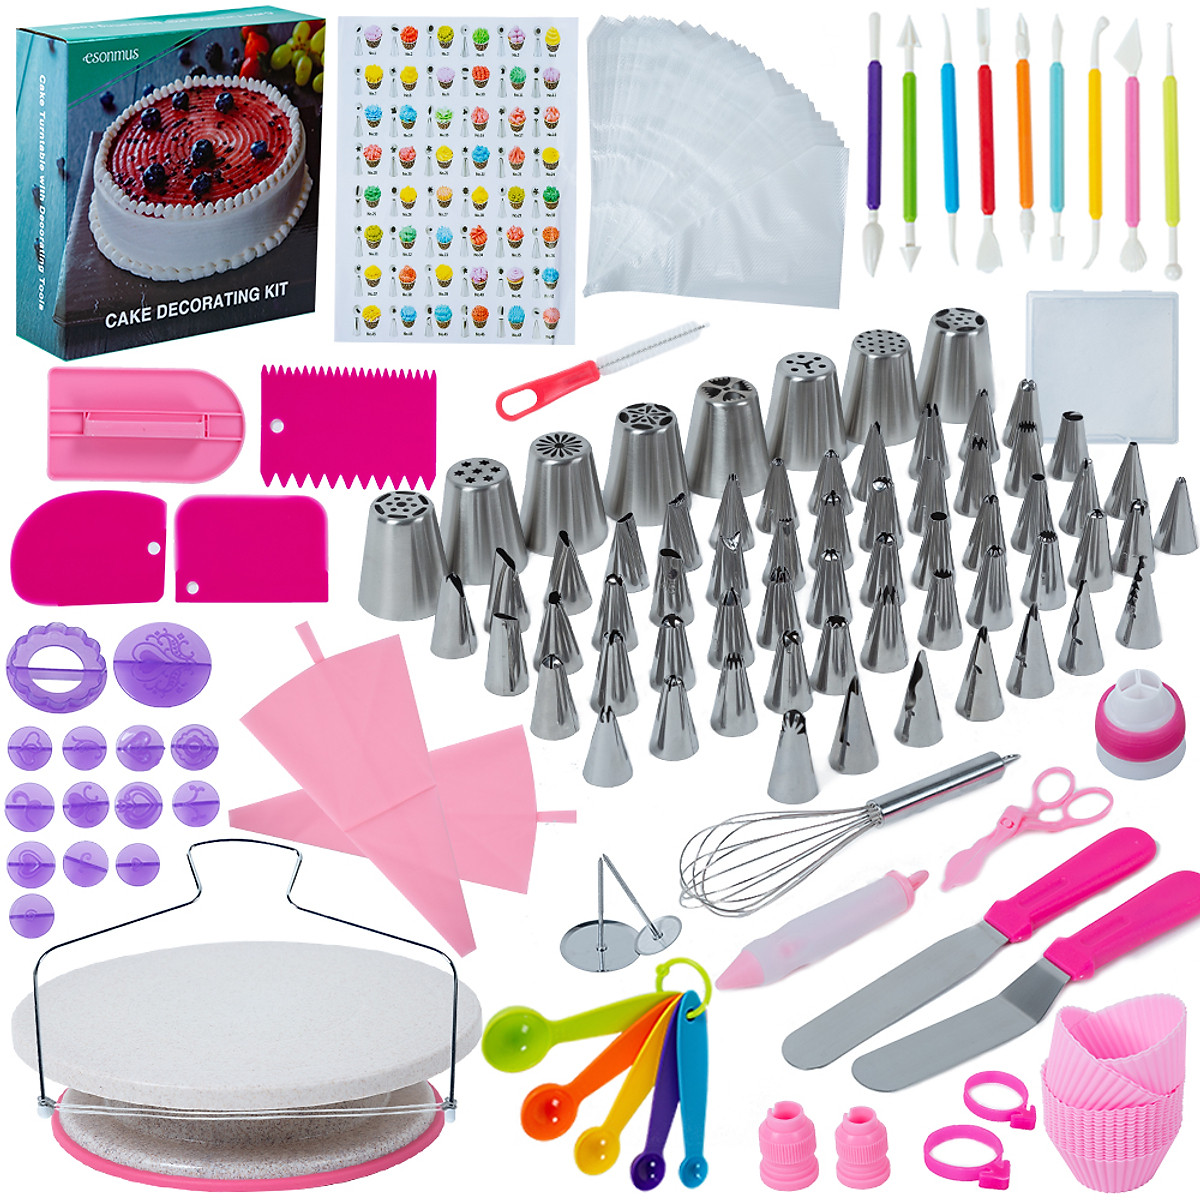 Mua Cake Decorating Supplies Kit - Baking and Piping Set | 194 Pieces |  Leveler, Rotating Turntable Stand, Frosting Bags and Tips, Decoration  Tools, Starter Guide trên Amazon Mỹ chính hãng 2023 | Giaonhan247